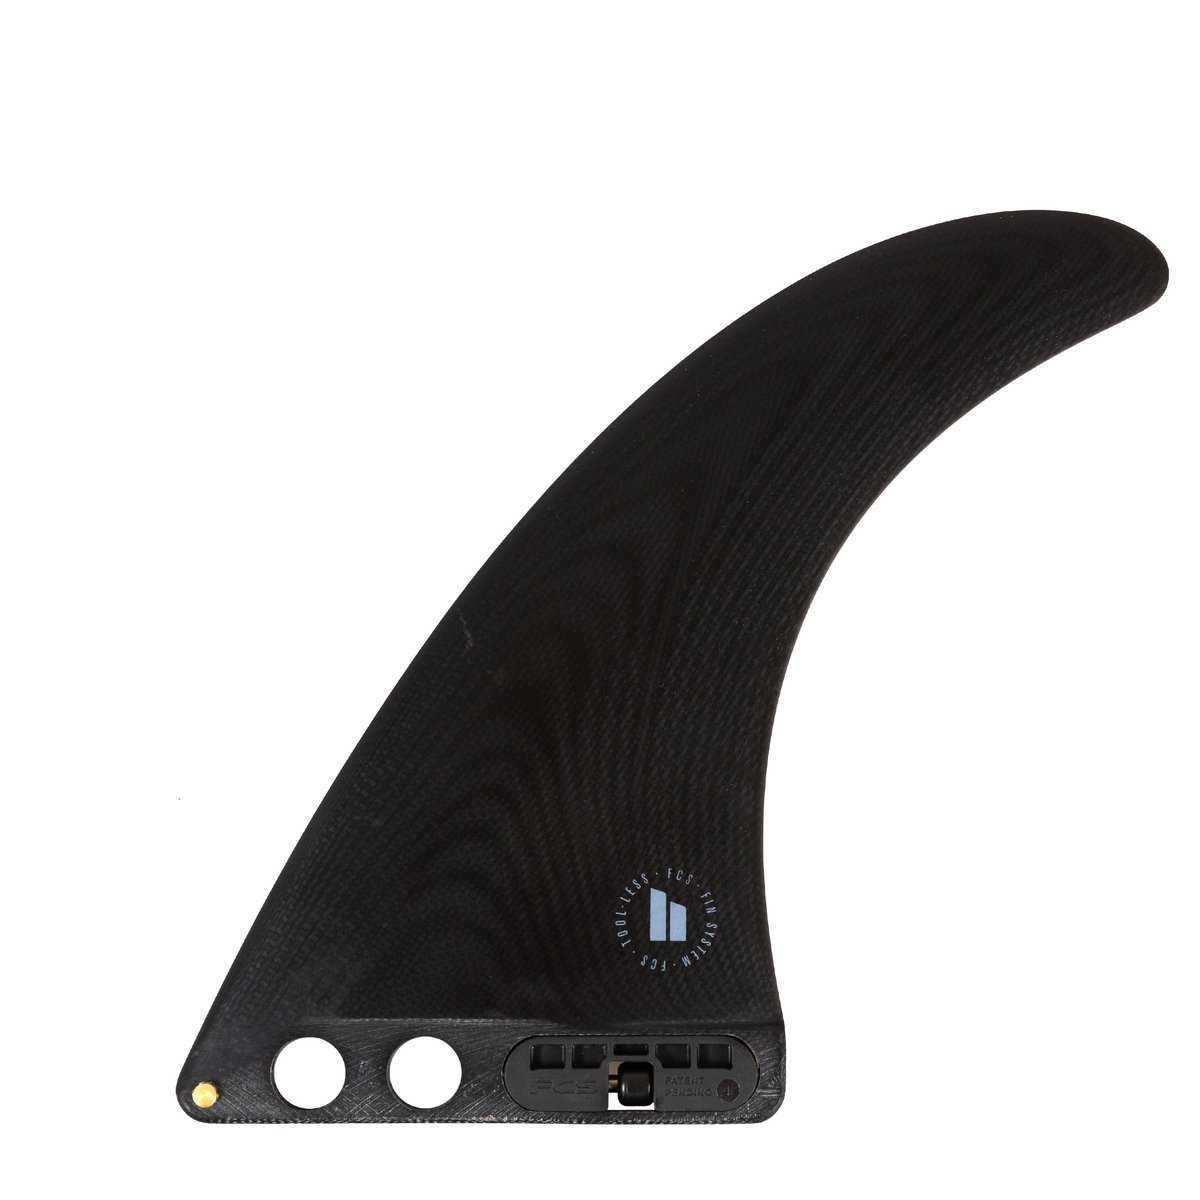 FCS2 エフシーエスツー ロングボード センターフィン 9.0" CONNECT PG LONGBOARD FIN コネクト シングルフィン Black / Clear 2カラー